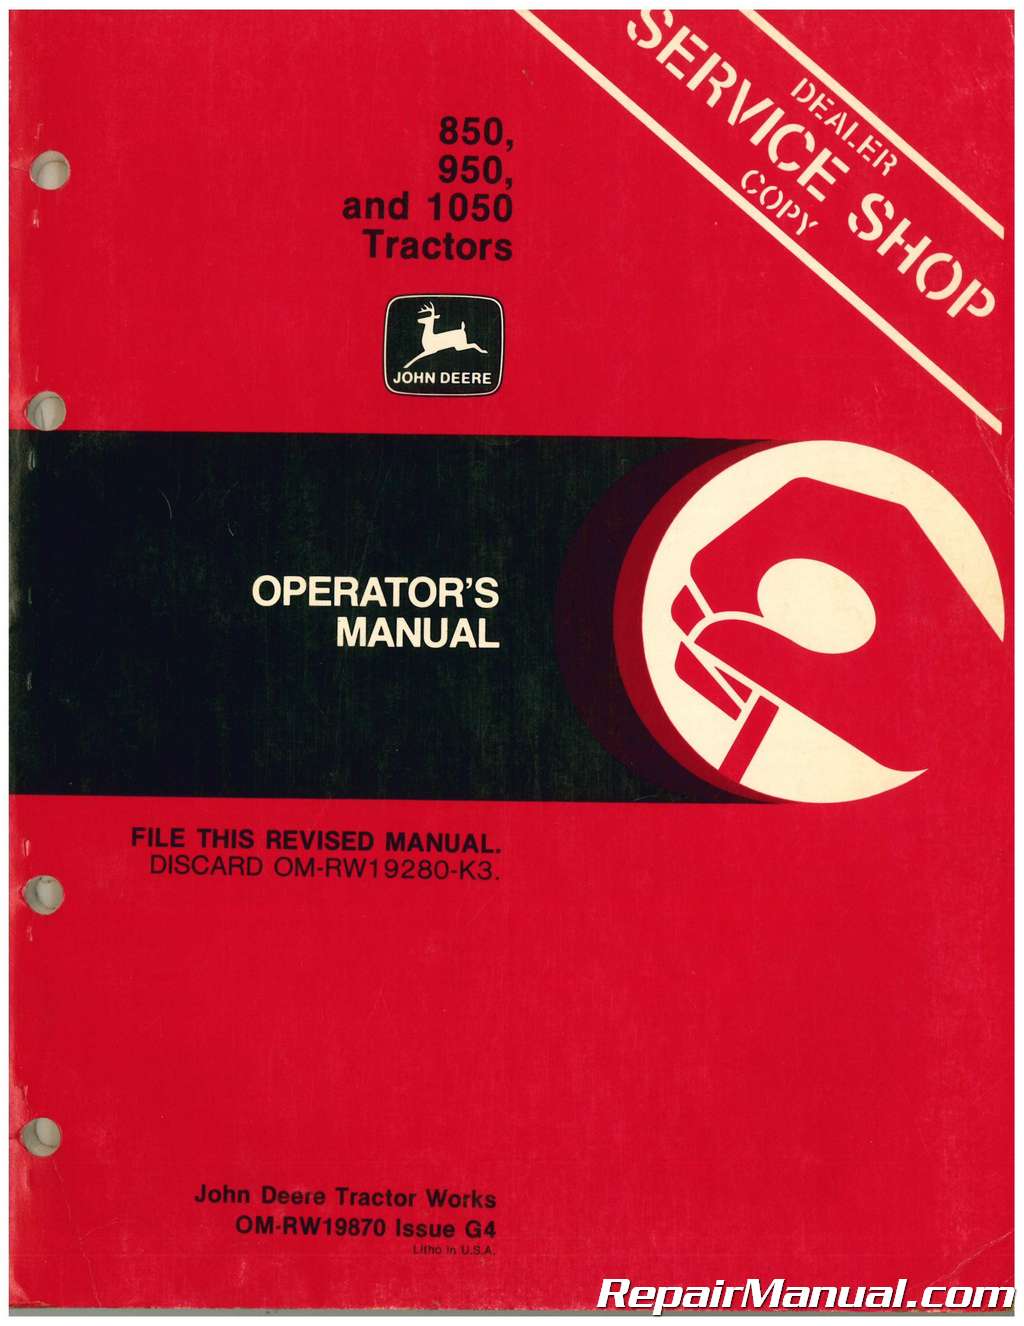 operating system concepts 9th edition instructor manual sample